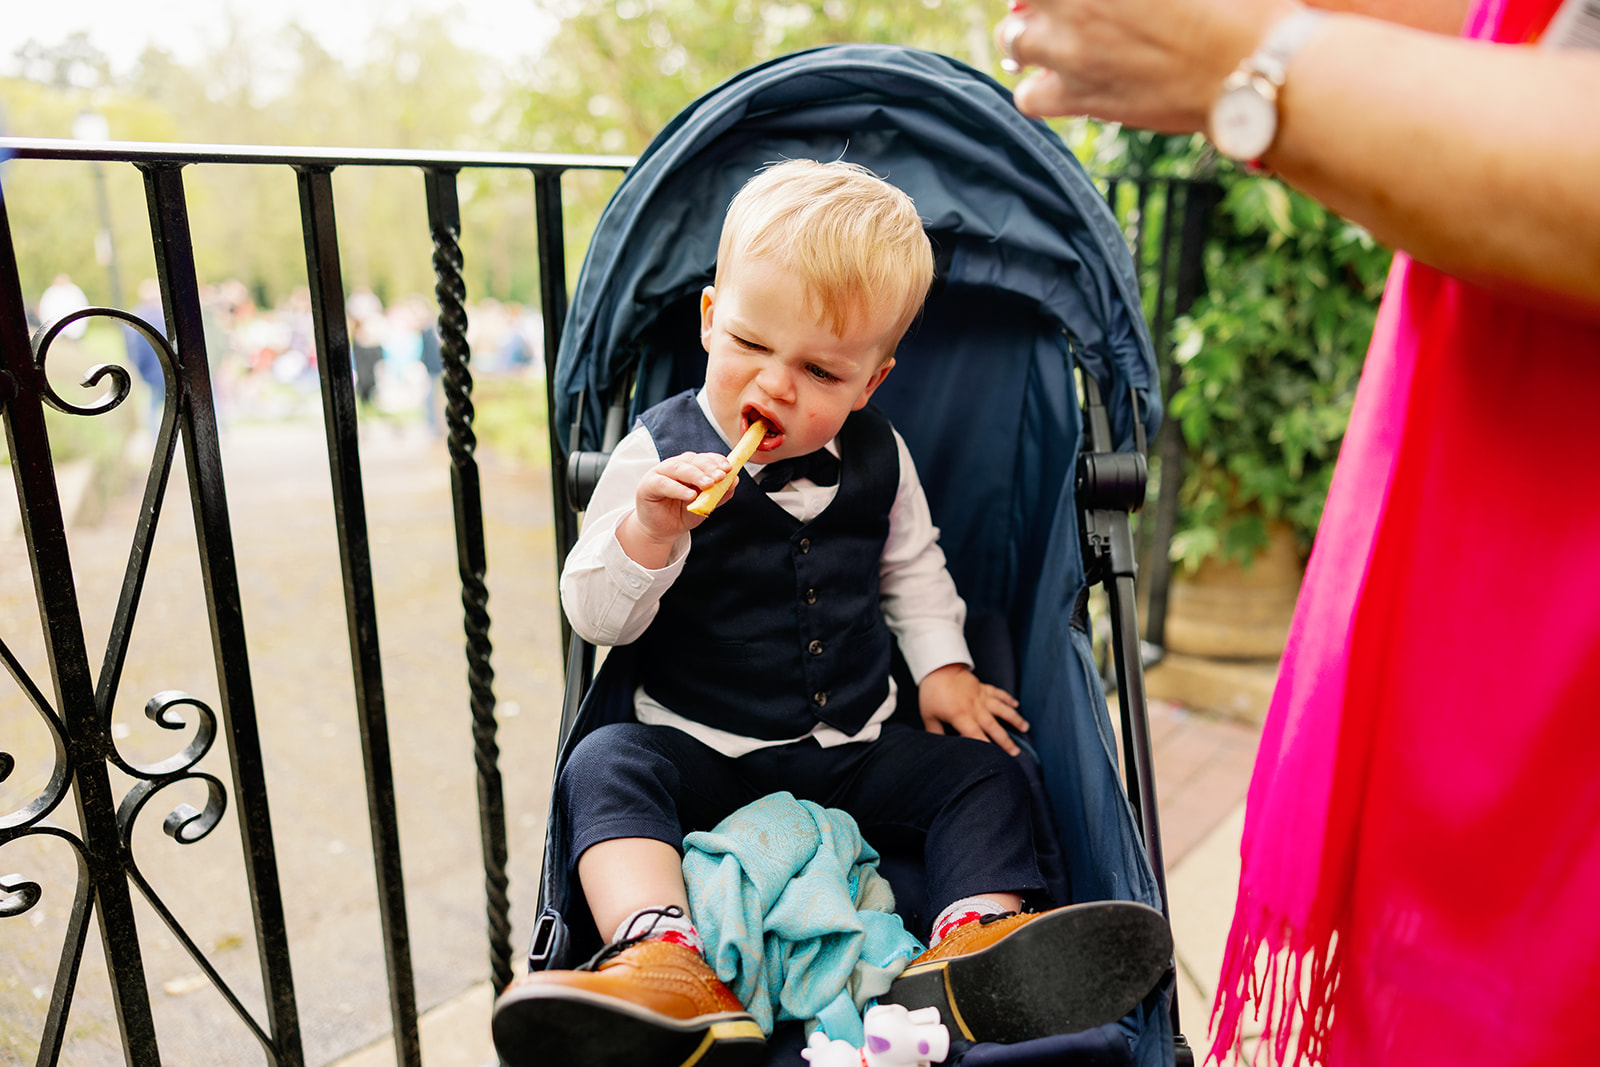 A child eating canapes on a wedding day 